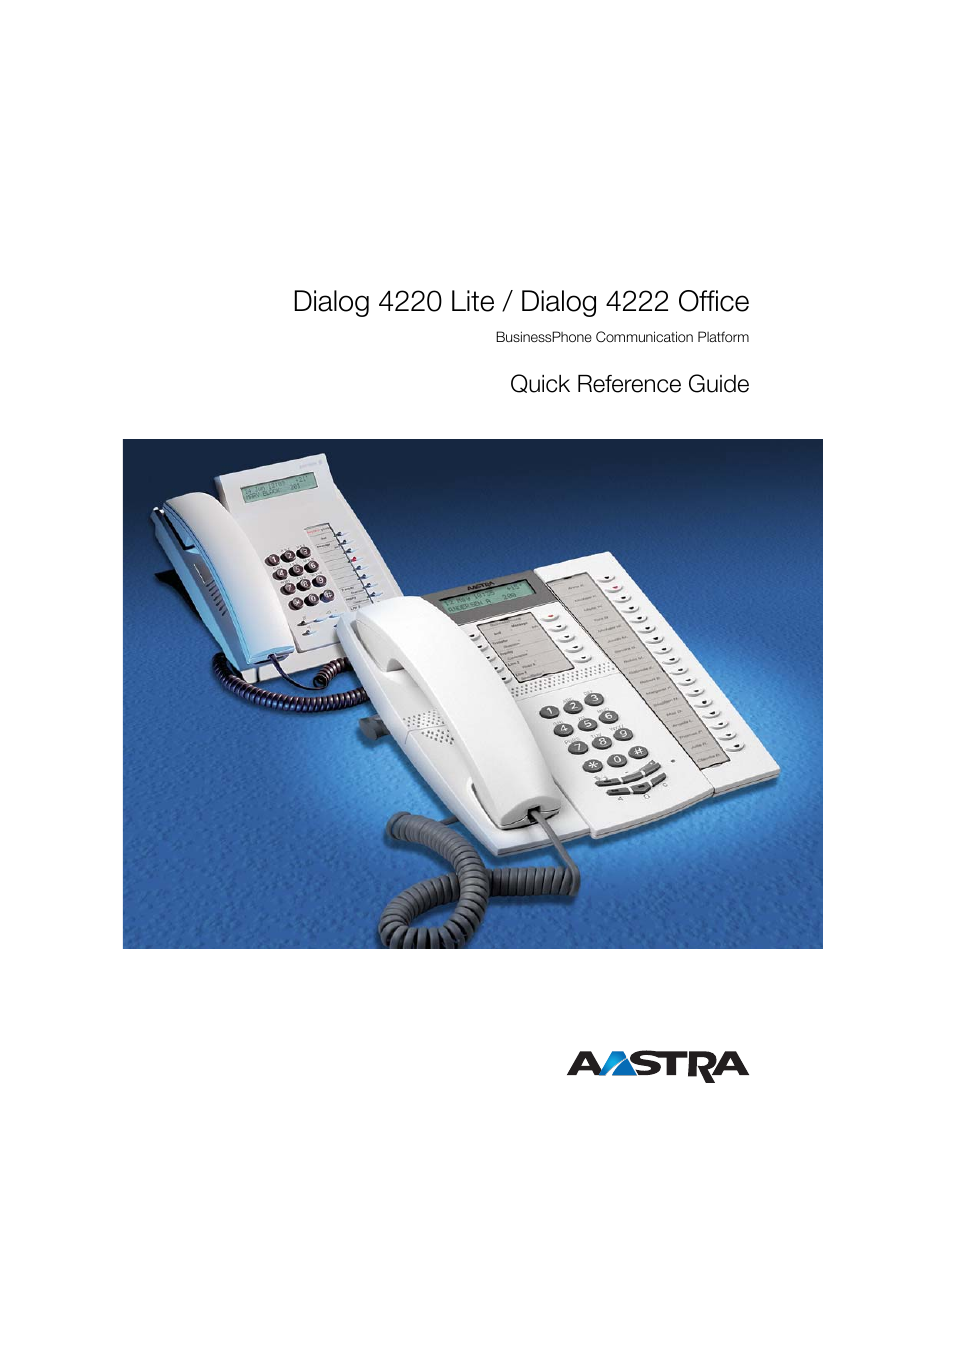 4222 Office for BusinessPhone Quick Reference Guide